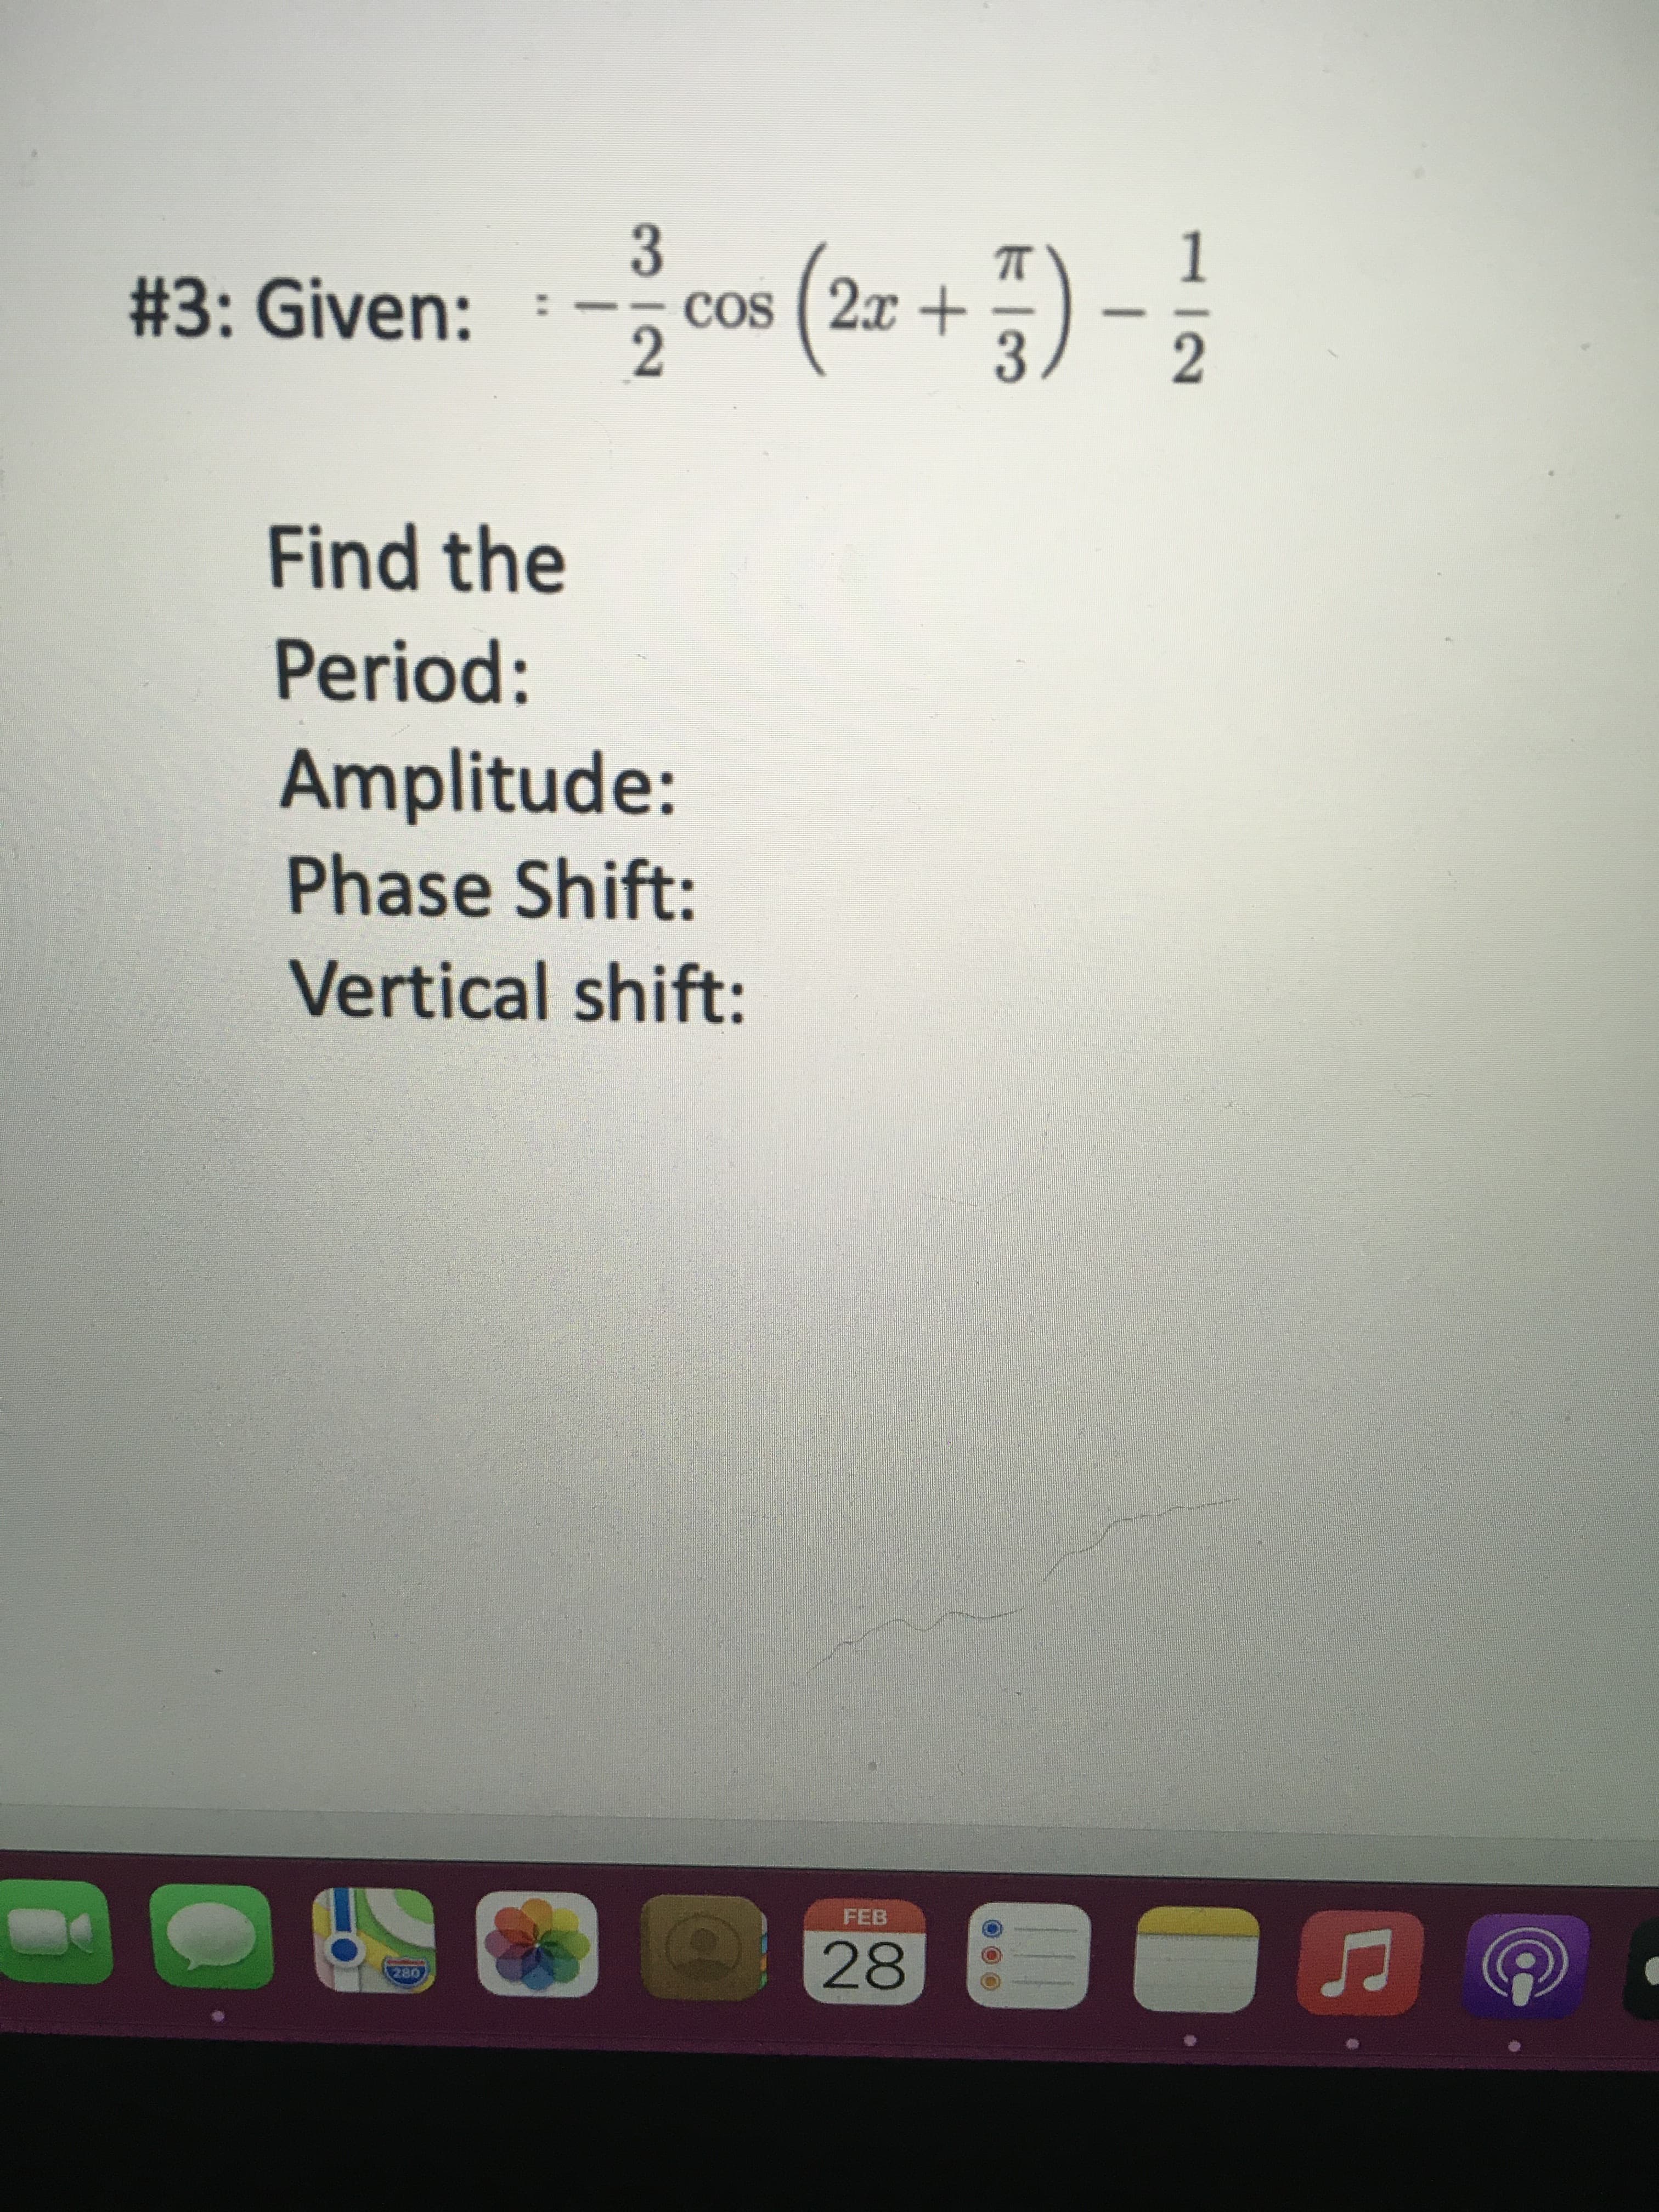 12
3.
2.
#3: Given:
cos ( 2x +
Find the
Period:
Amplitude:
Phase Shift:
Vertical shift:
FEB
28
280
